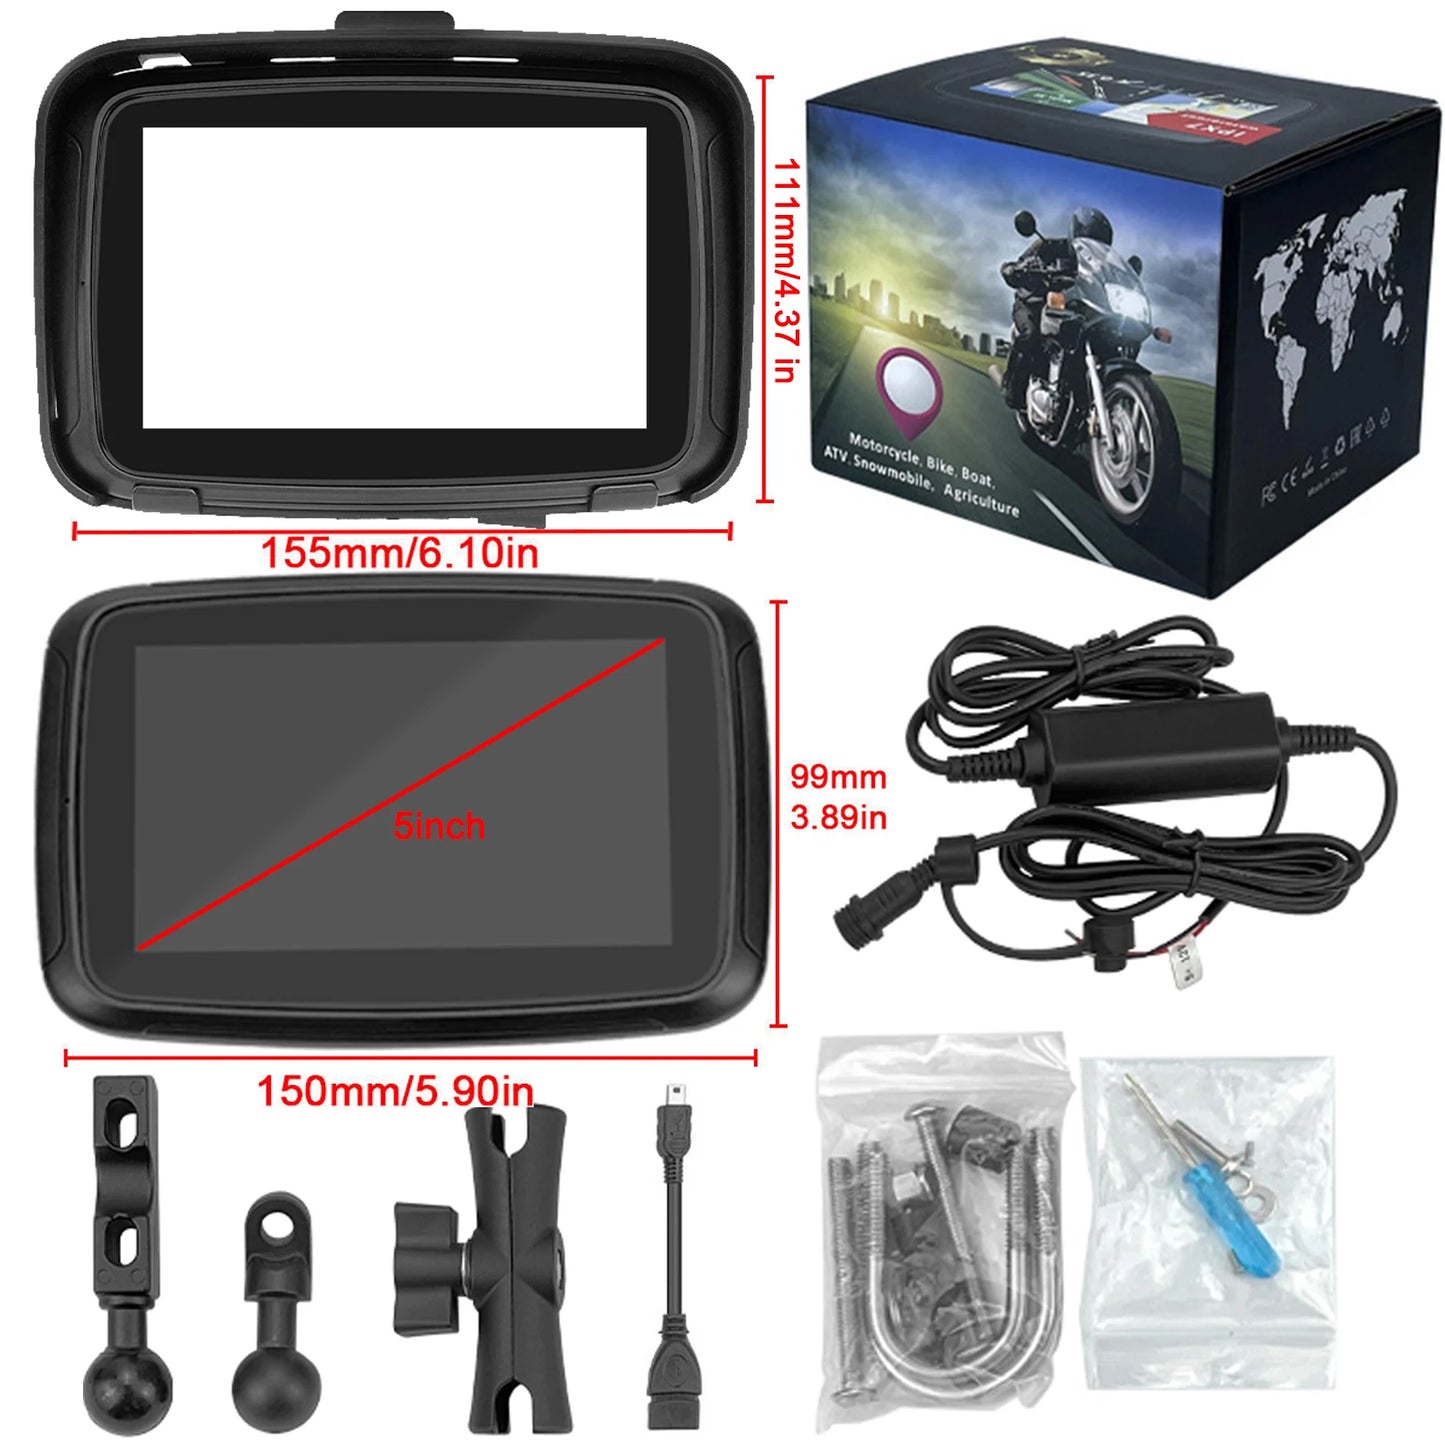 Binize 5 Inch IPS Touch Screen Portable Motorcycle Navigator Support Wireless CarPlay ＆ Android Auto Waterproof